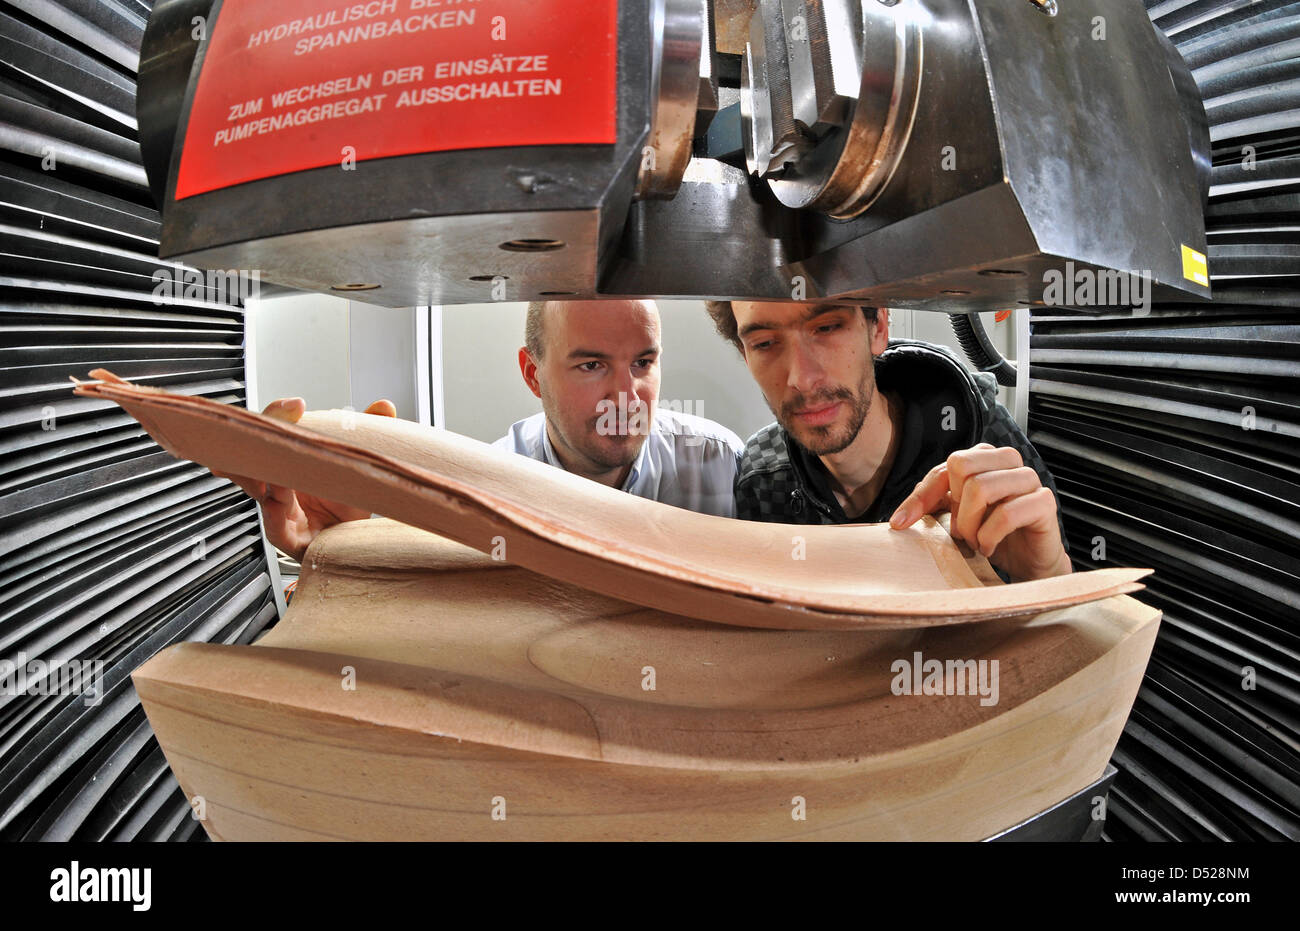 Chartered engineer Lars Ehlers (L) and student Martin Hegenbarth (R) inspect a wood shaped part in Leipzig, Germany, 25 October 2010. Scientists of Civic Engineering faculty of Leipzig University of Applied Sciences research on heatable wood elements. An electroconductive foil is pressed between sheets of veneer plywood, this new form of heating is aimed to be very economical and t Stock Photo